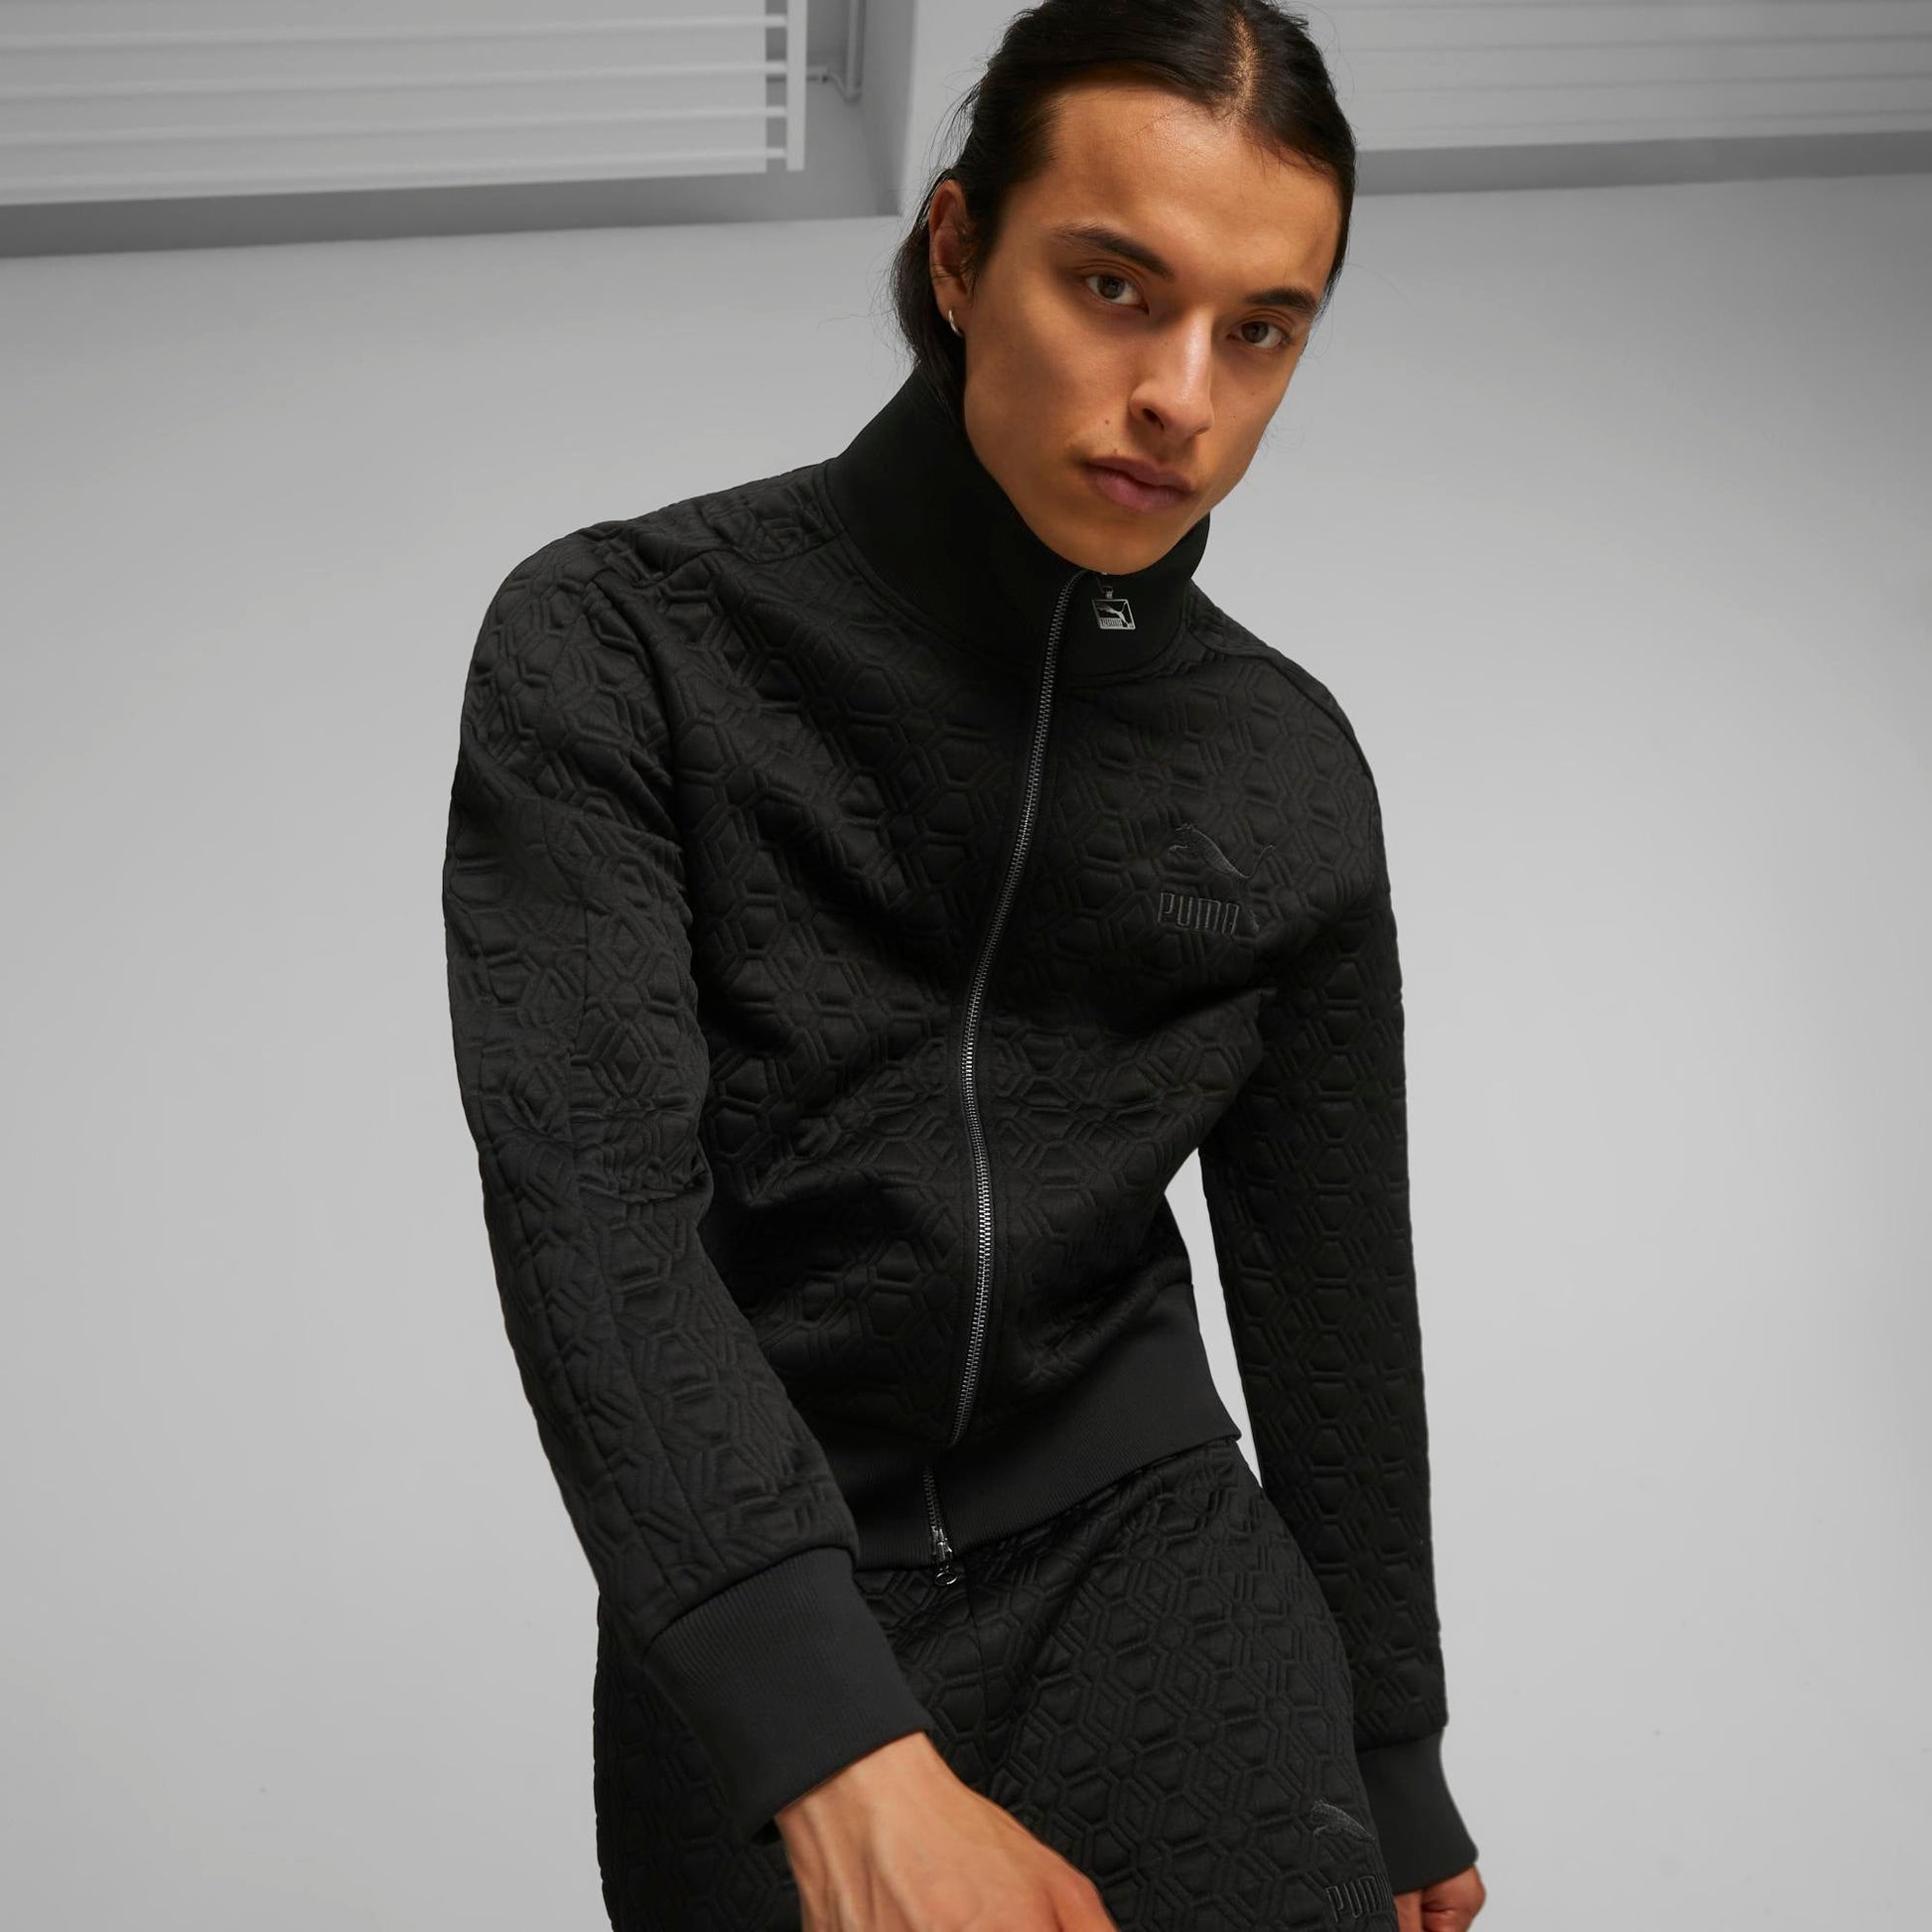 LUXE SPORT T7 TRACK JACKET